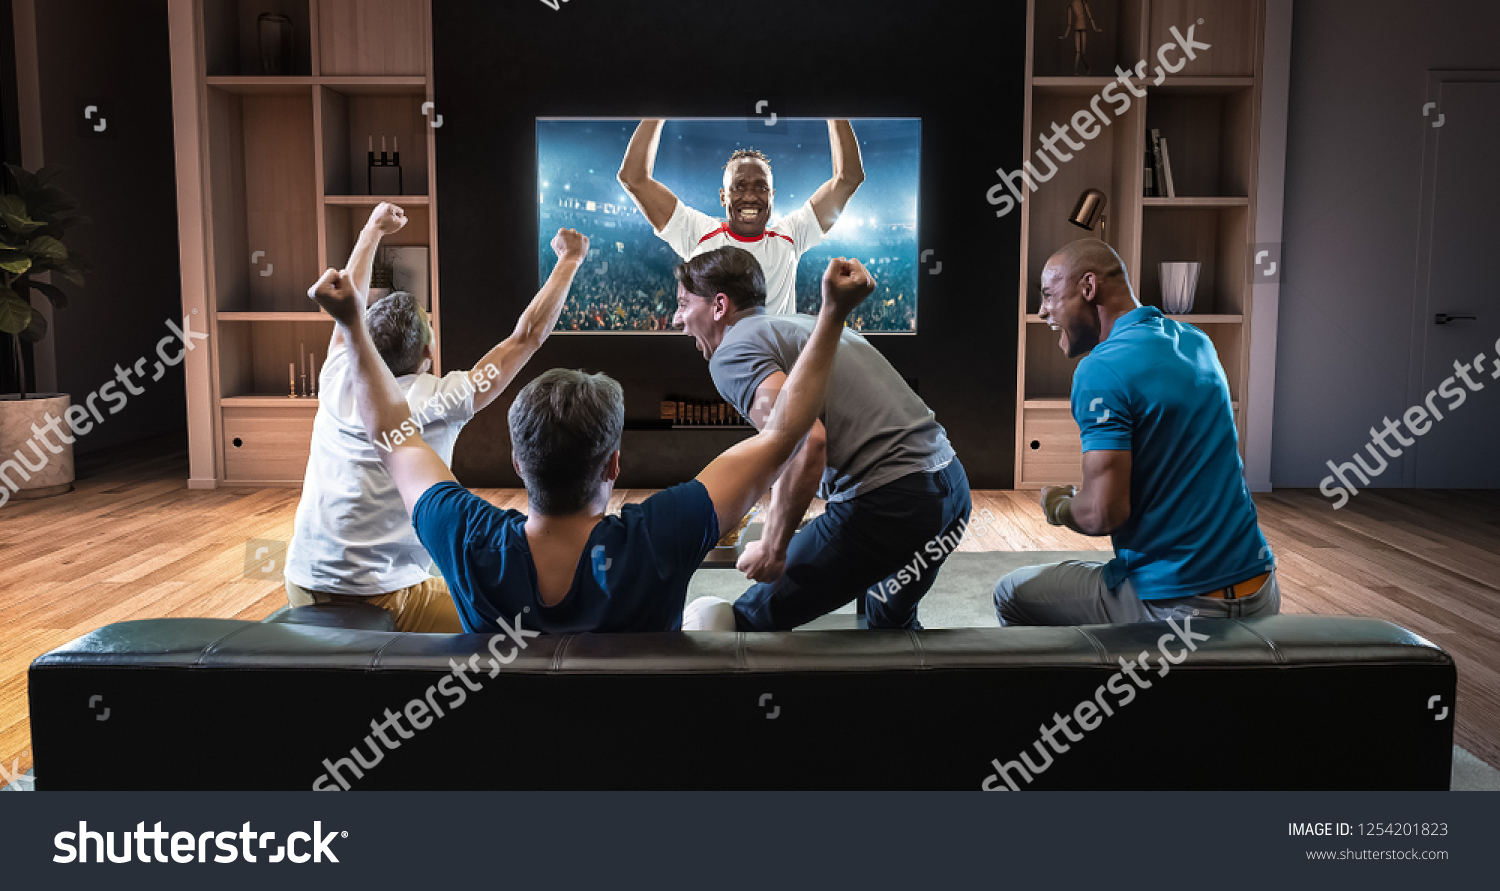 Group of students are watching a soccer moment on the TV and celebrating a goal, sitting on the couch in the living room. The living room is made in 3D. #1254201823